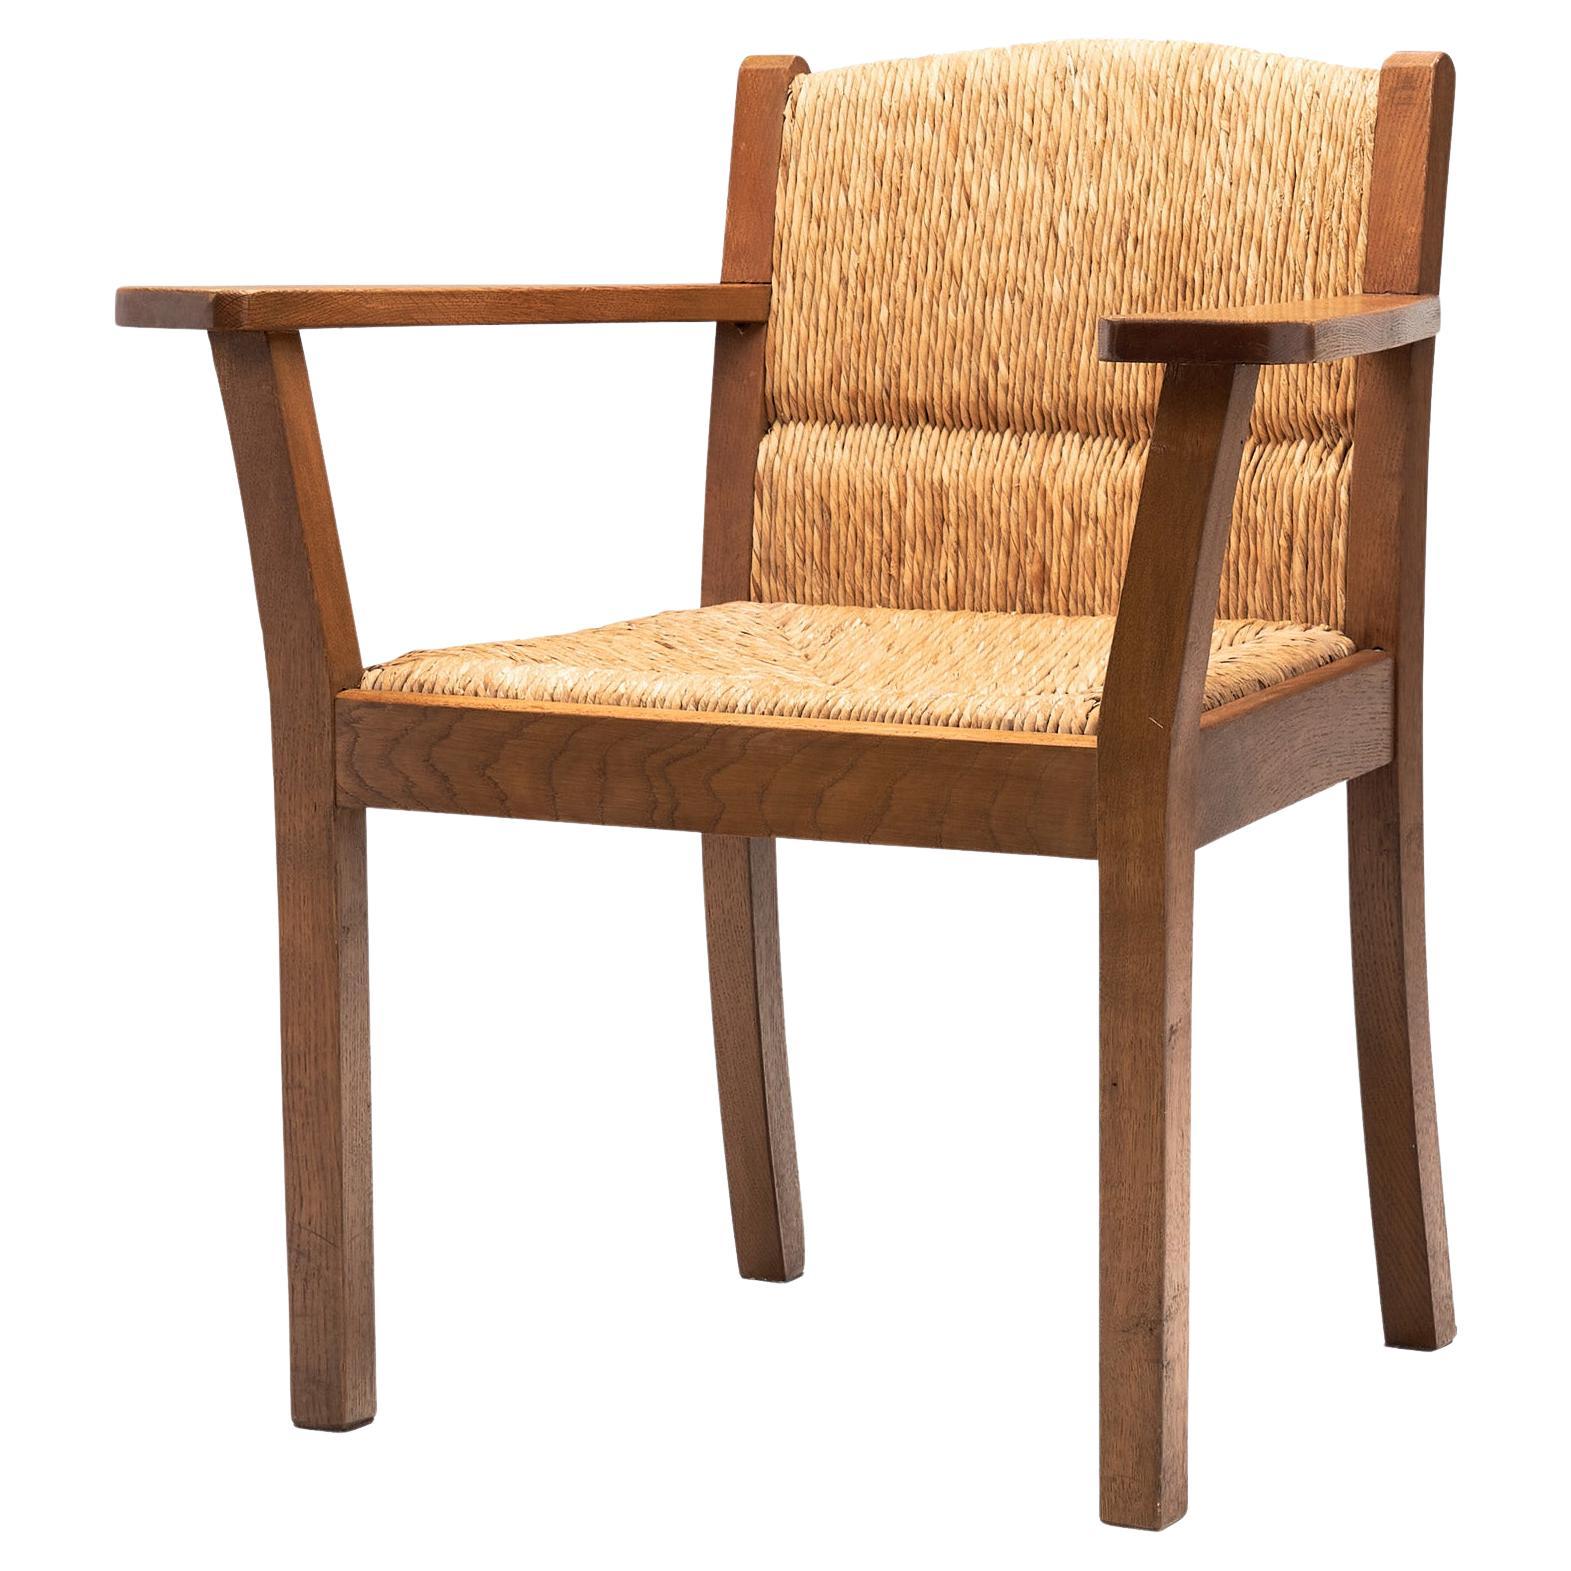 Oak Worpsweder Armchair by Willi Ohler for Erich Schultz, Germany 1920s